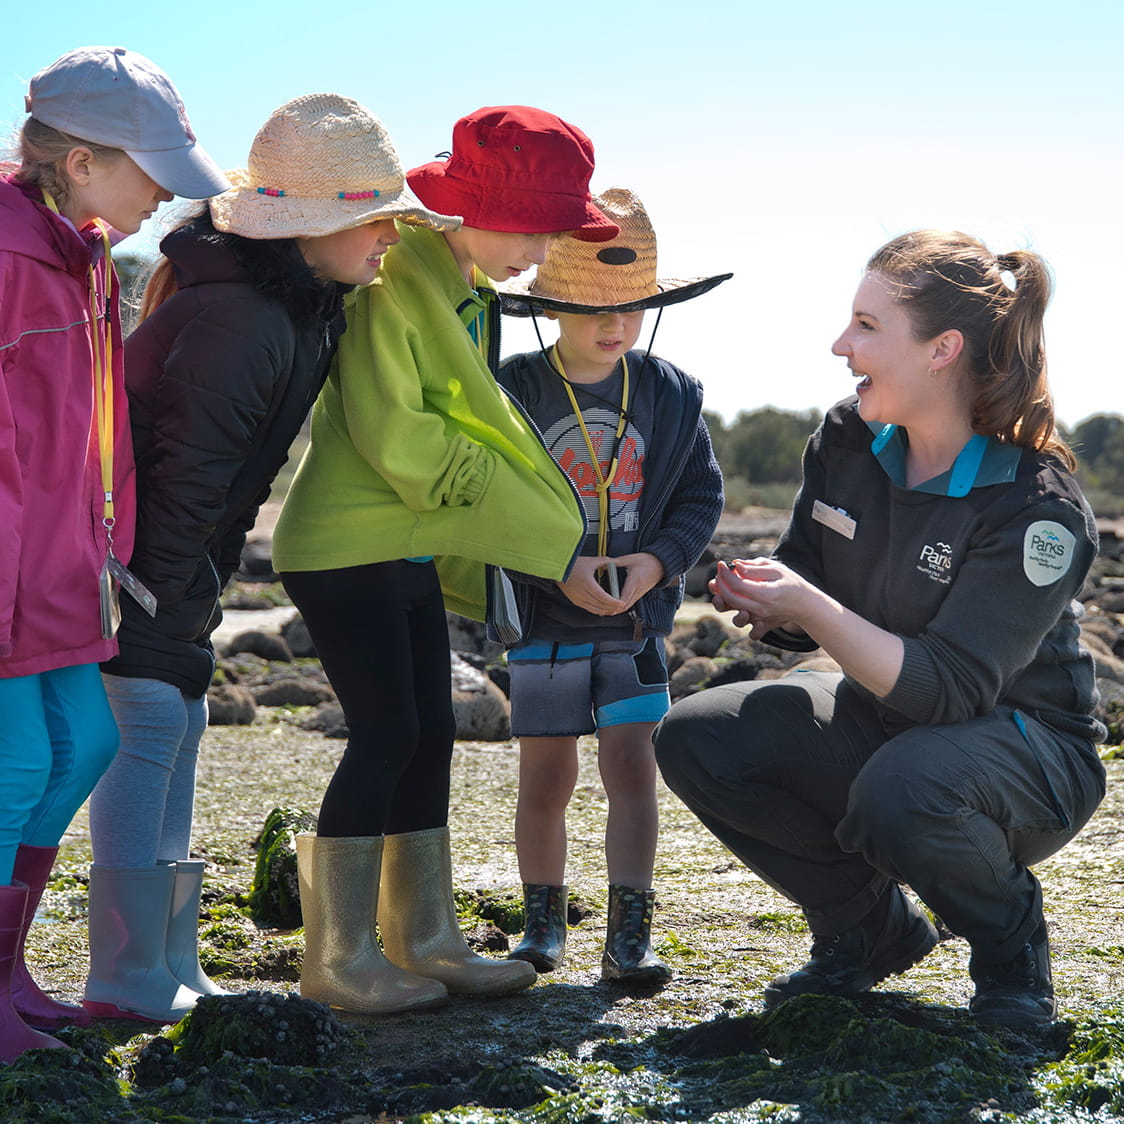 A group of kids wearing hats looking at something a laughing Ranger is holding in her hands.